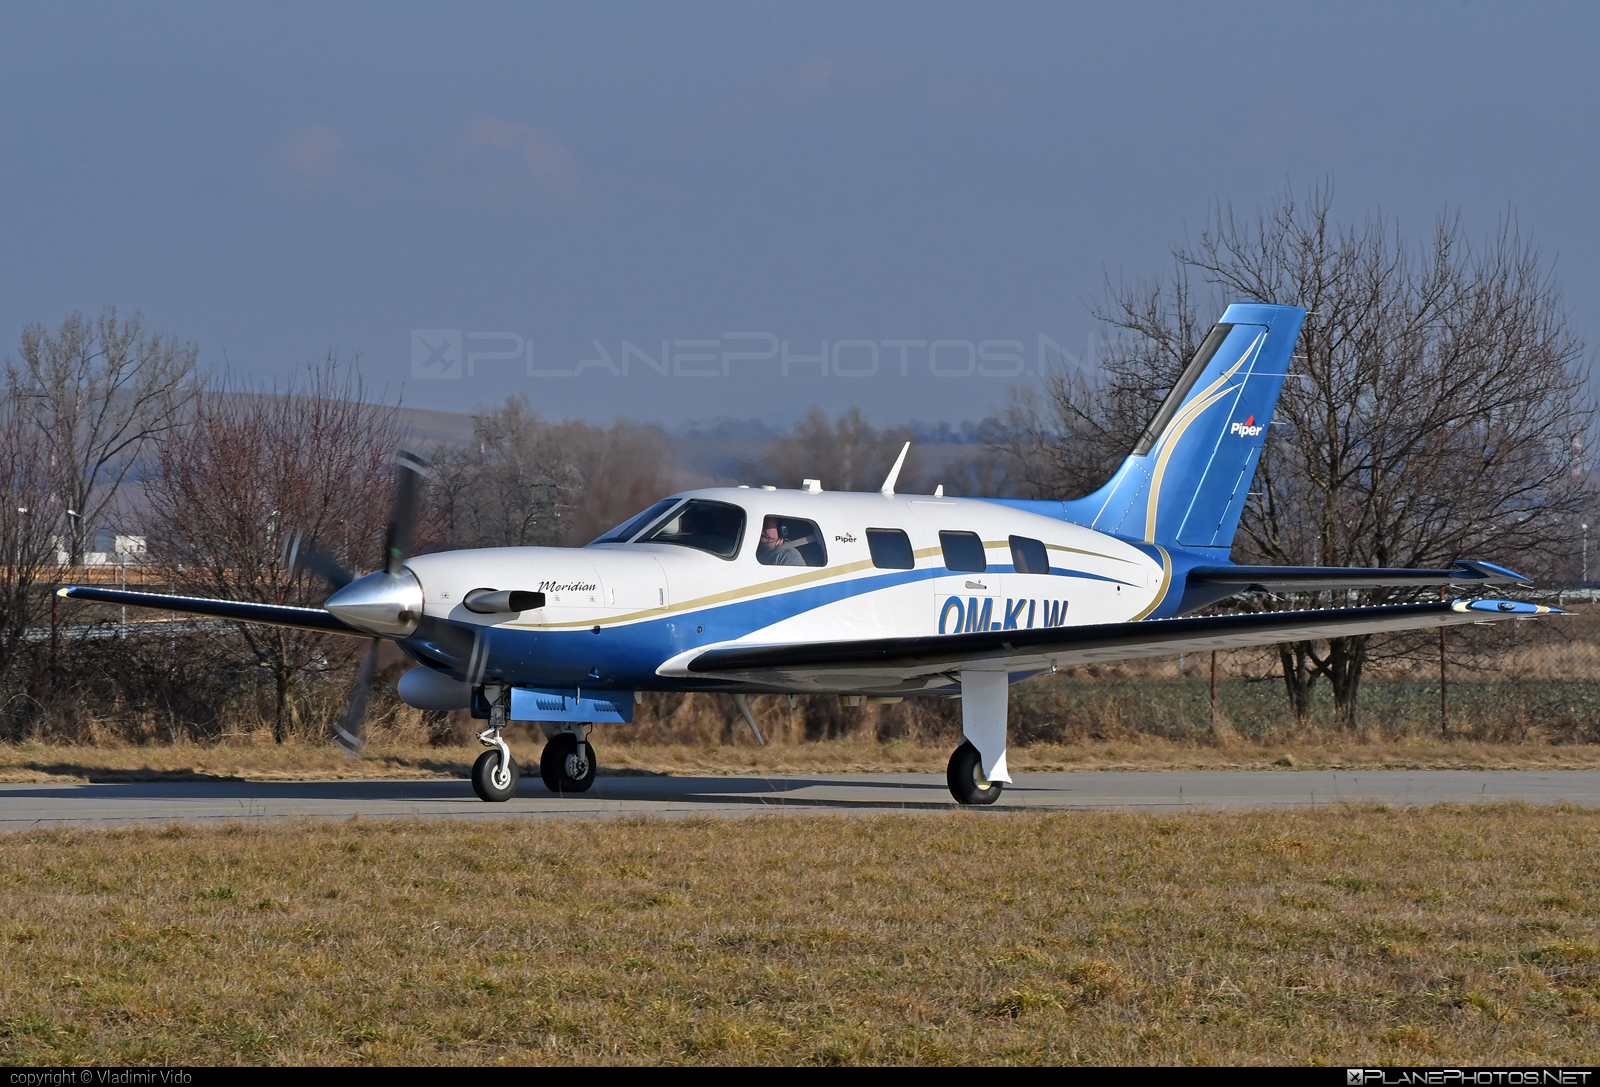 Piper PA-46-500TP Malibu Meridian - OM-KLW operated by SEAGLE SK.ATO.02 #malibumeridian #pa46 #pa46500tp #piper #pipermalibu #pipermalibumeridian #seagleskATO02